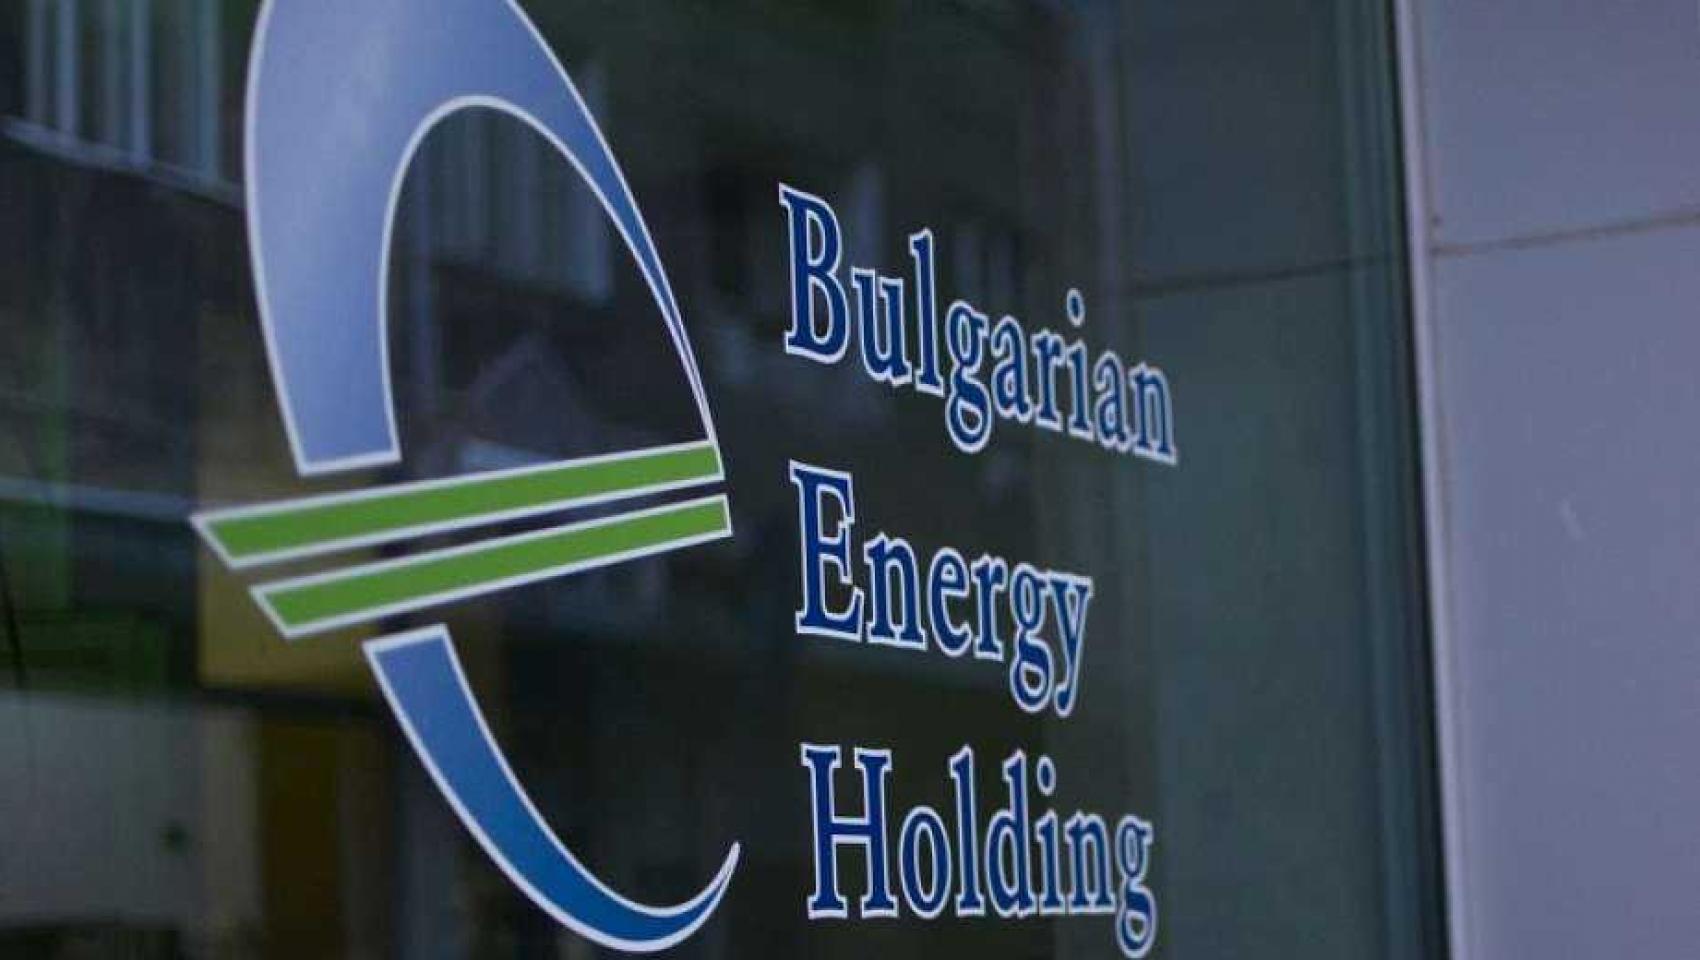 The Bulgarian energy holding made several key moves in state-owned